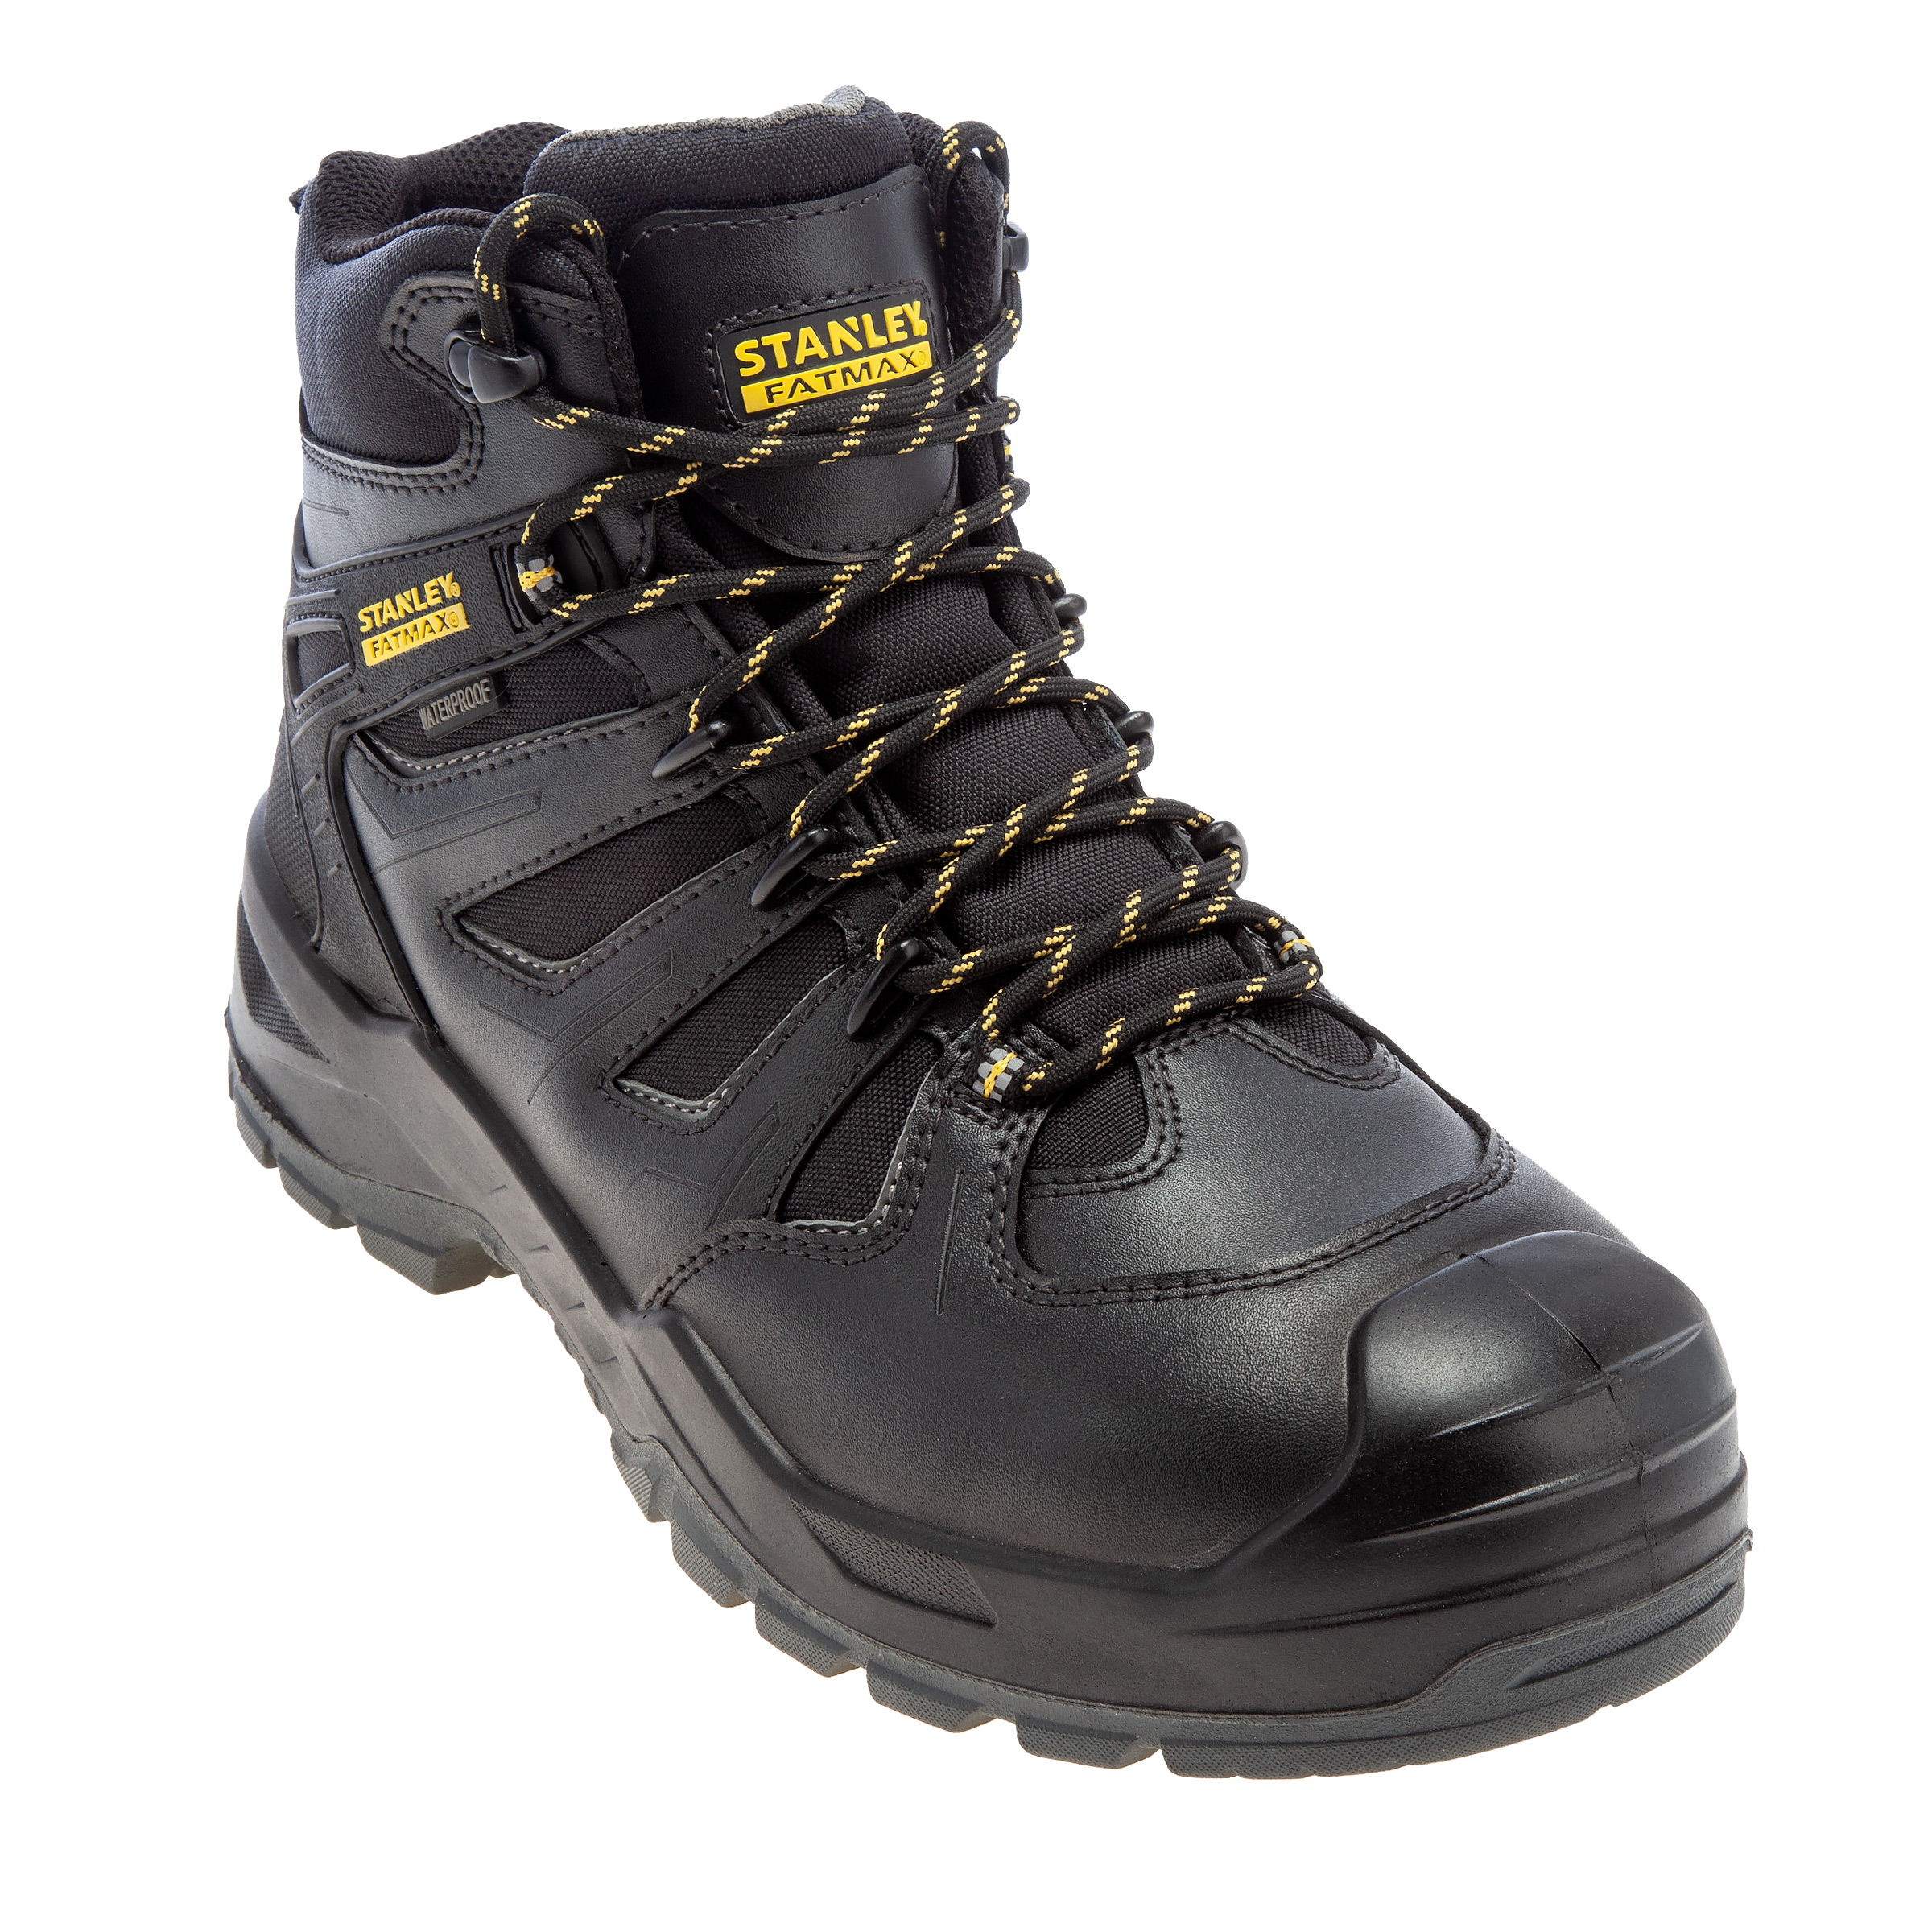 Stanley FatMax Wellbank Safety Boots